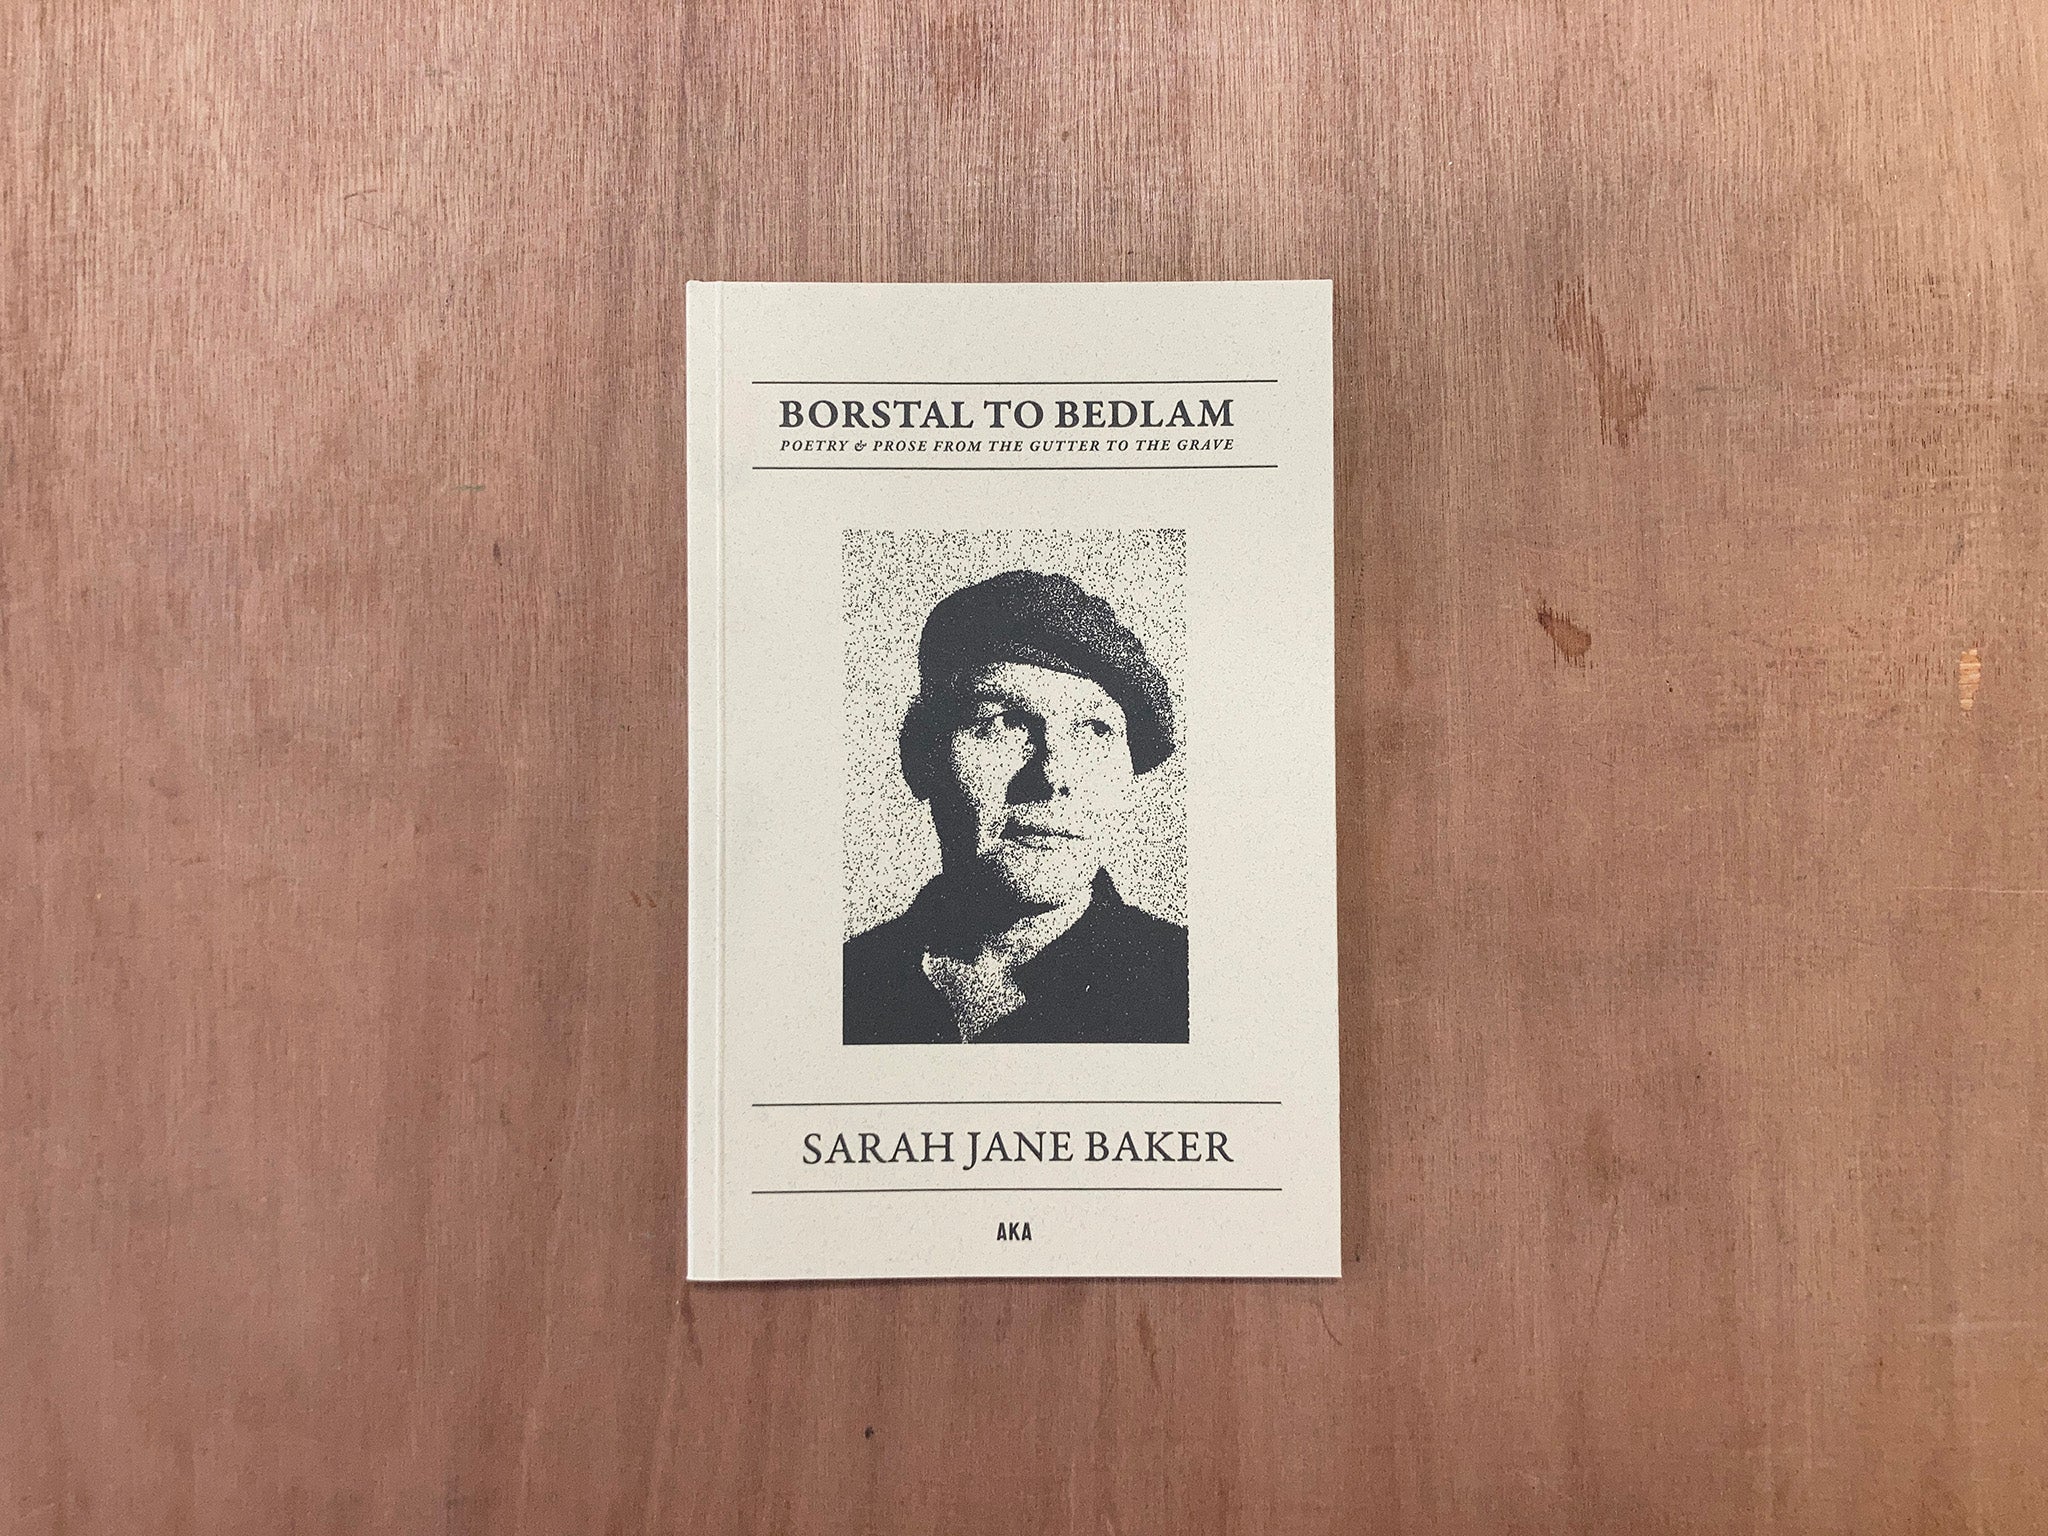 BORSTAL TO BEDLAM: POETRY & PROSE FROM THE GUTTER TO THE GRAVE by Sarah Jane Baker